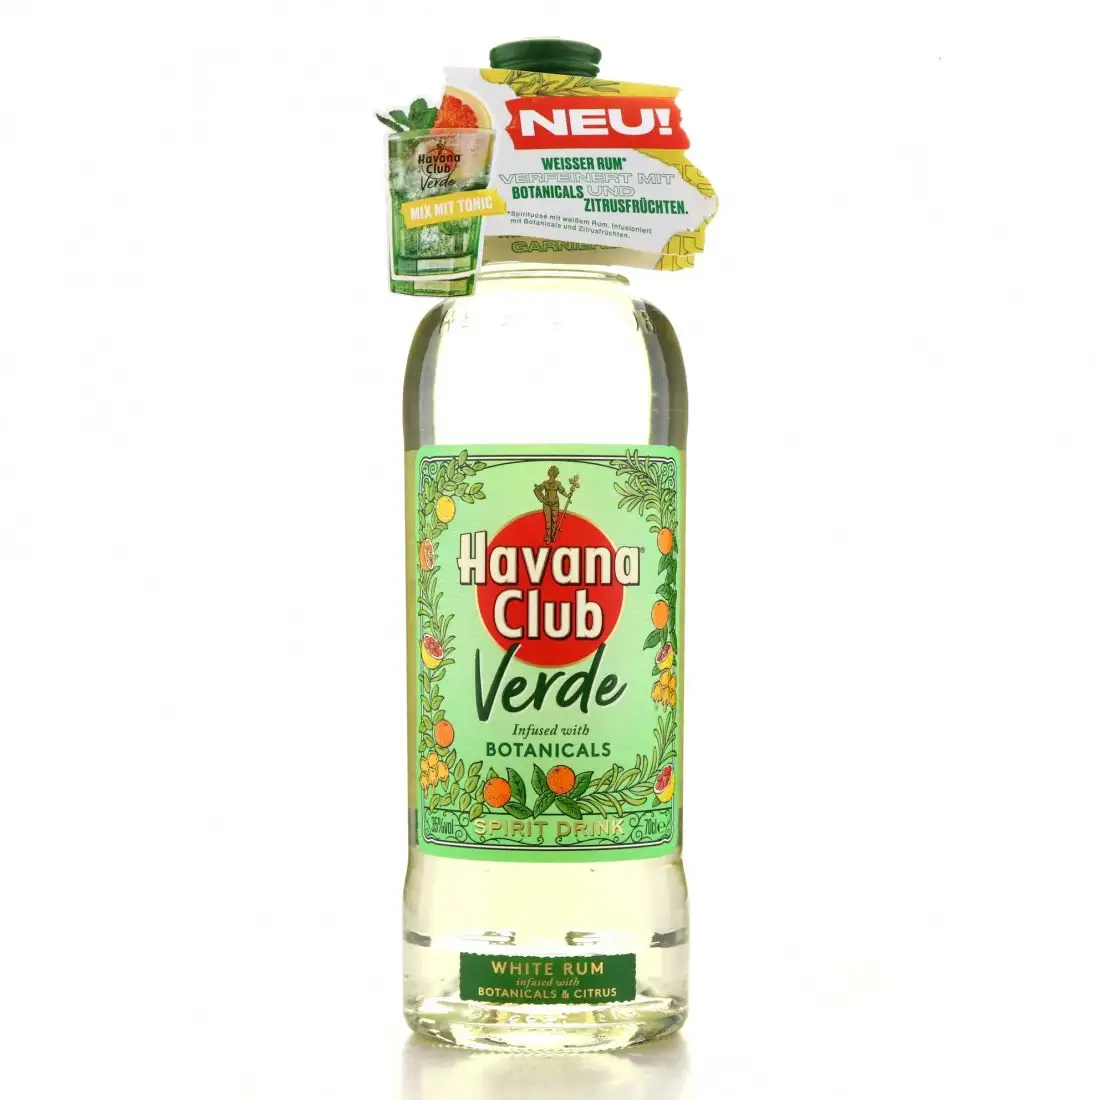 Image of the front of the bottle of the rum Verde